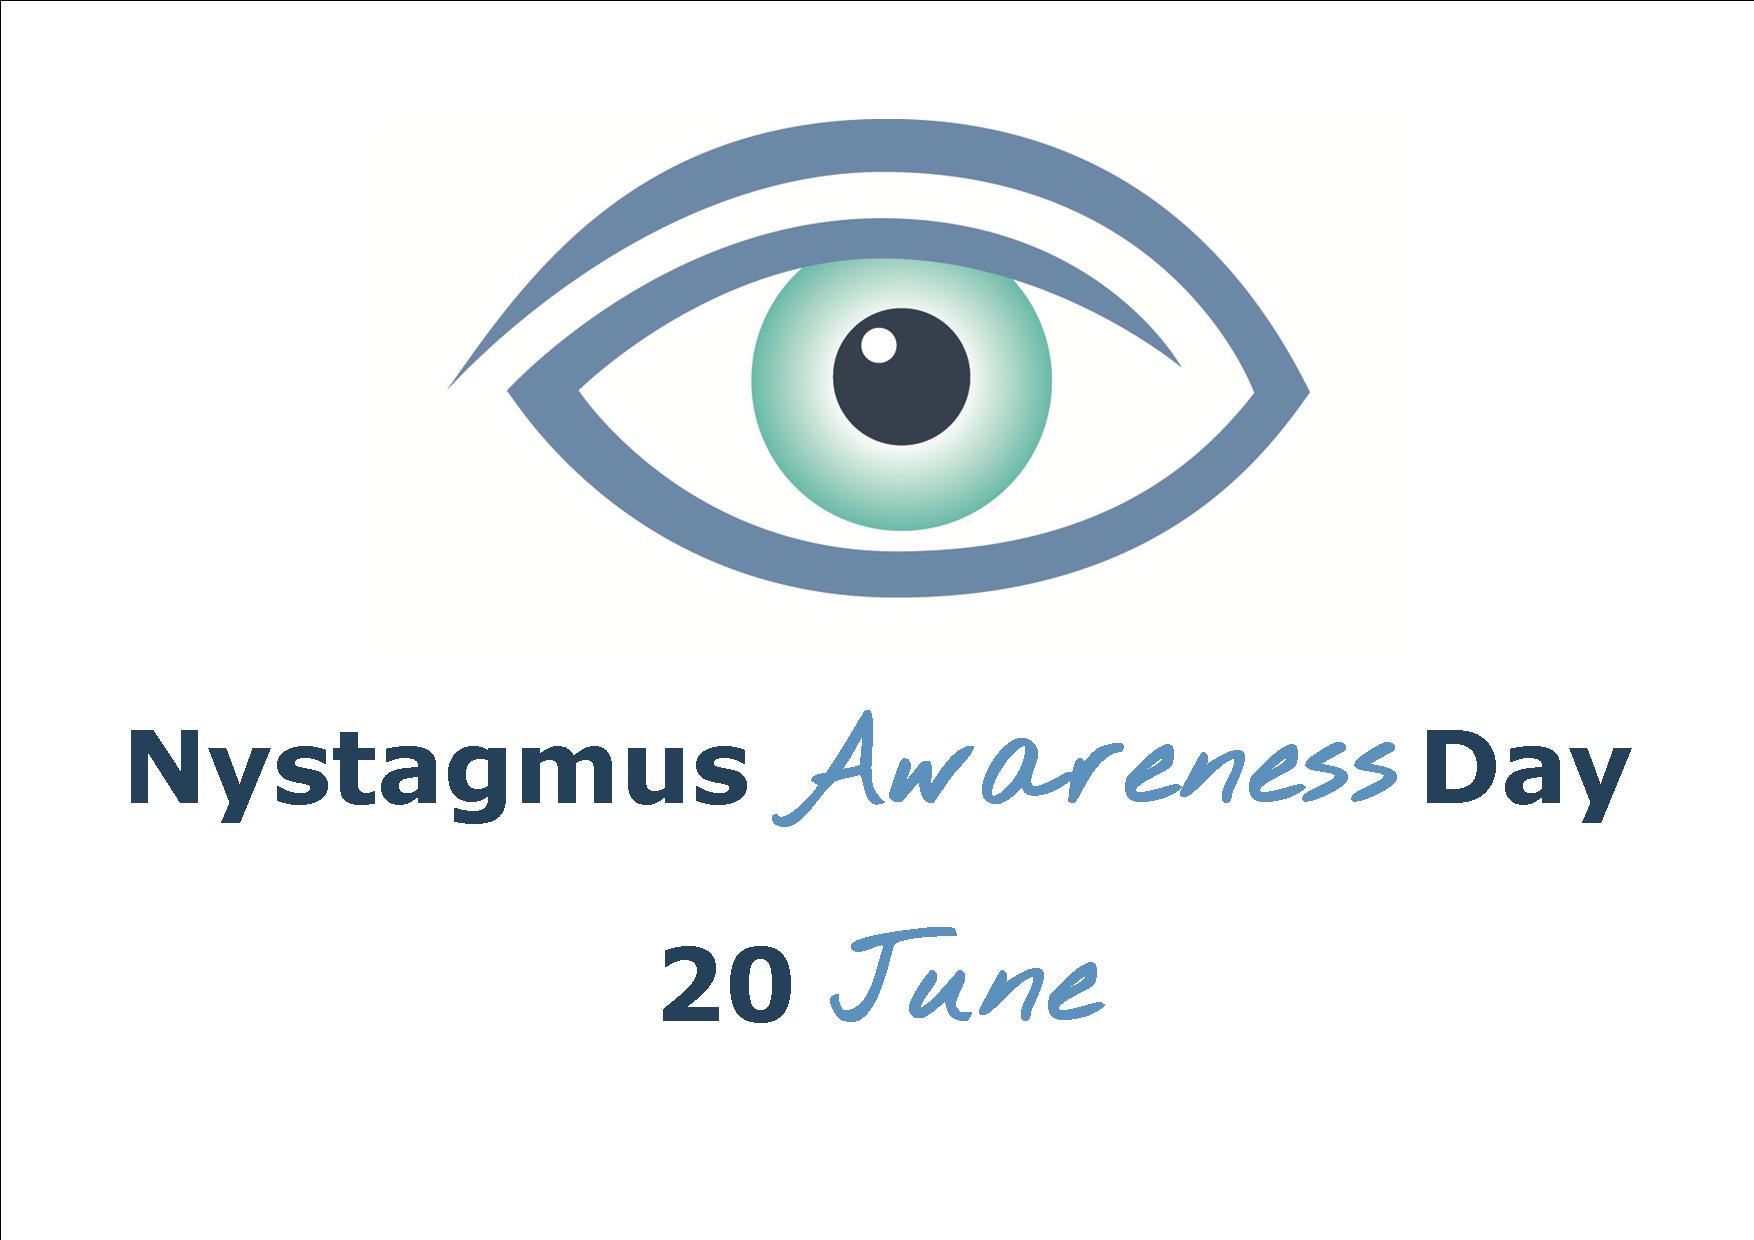 People’s perceptions of nystagmus and the impact of Covid-19